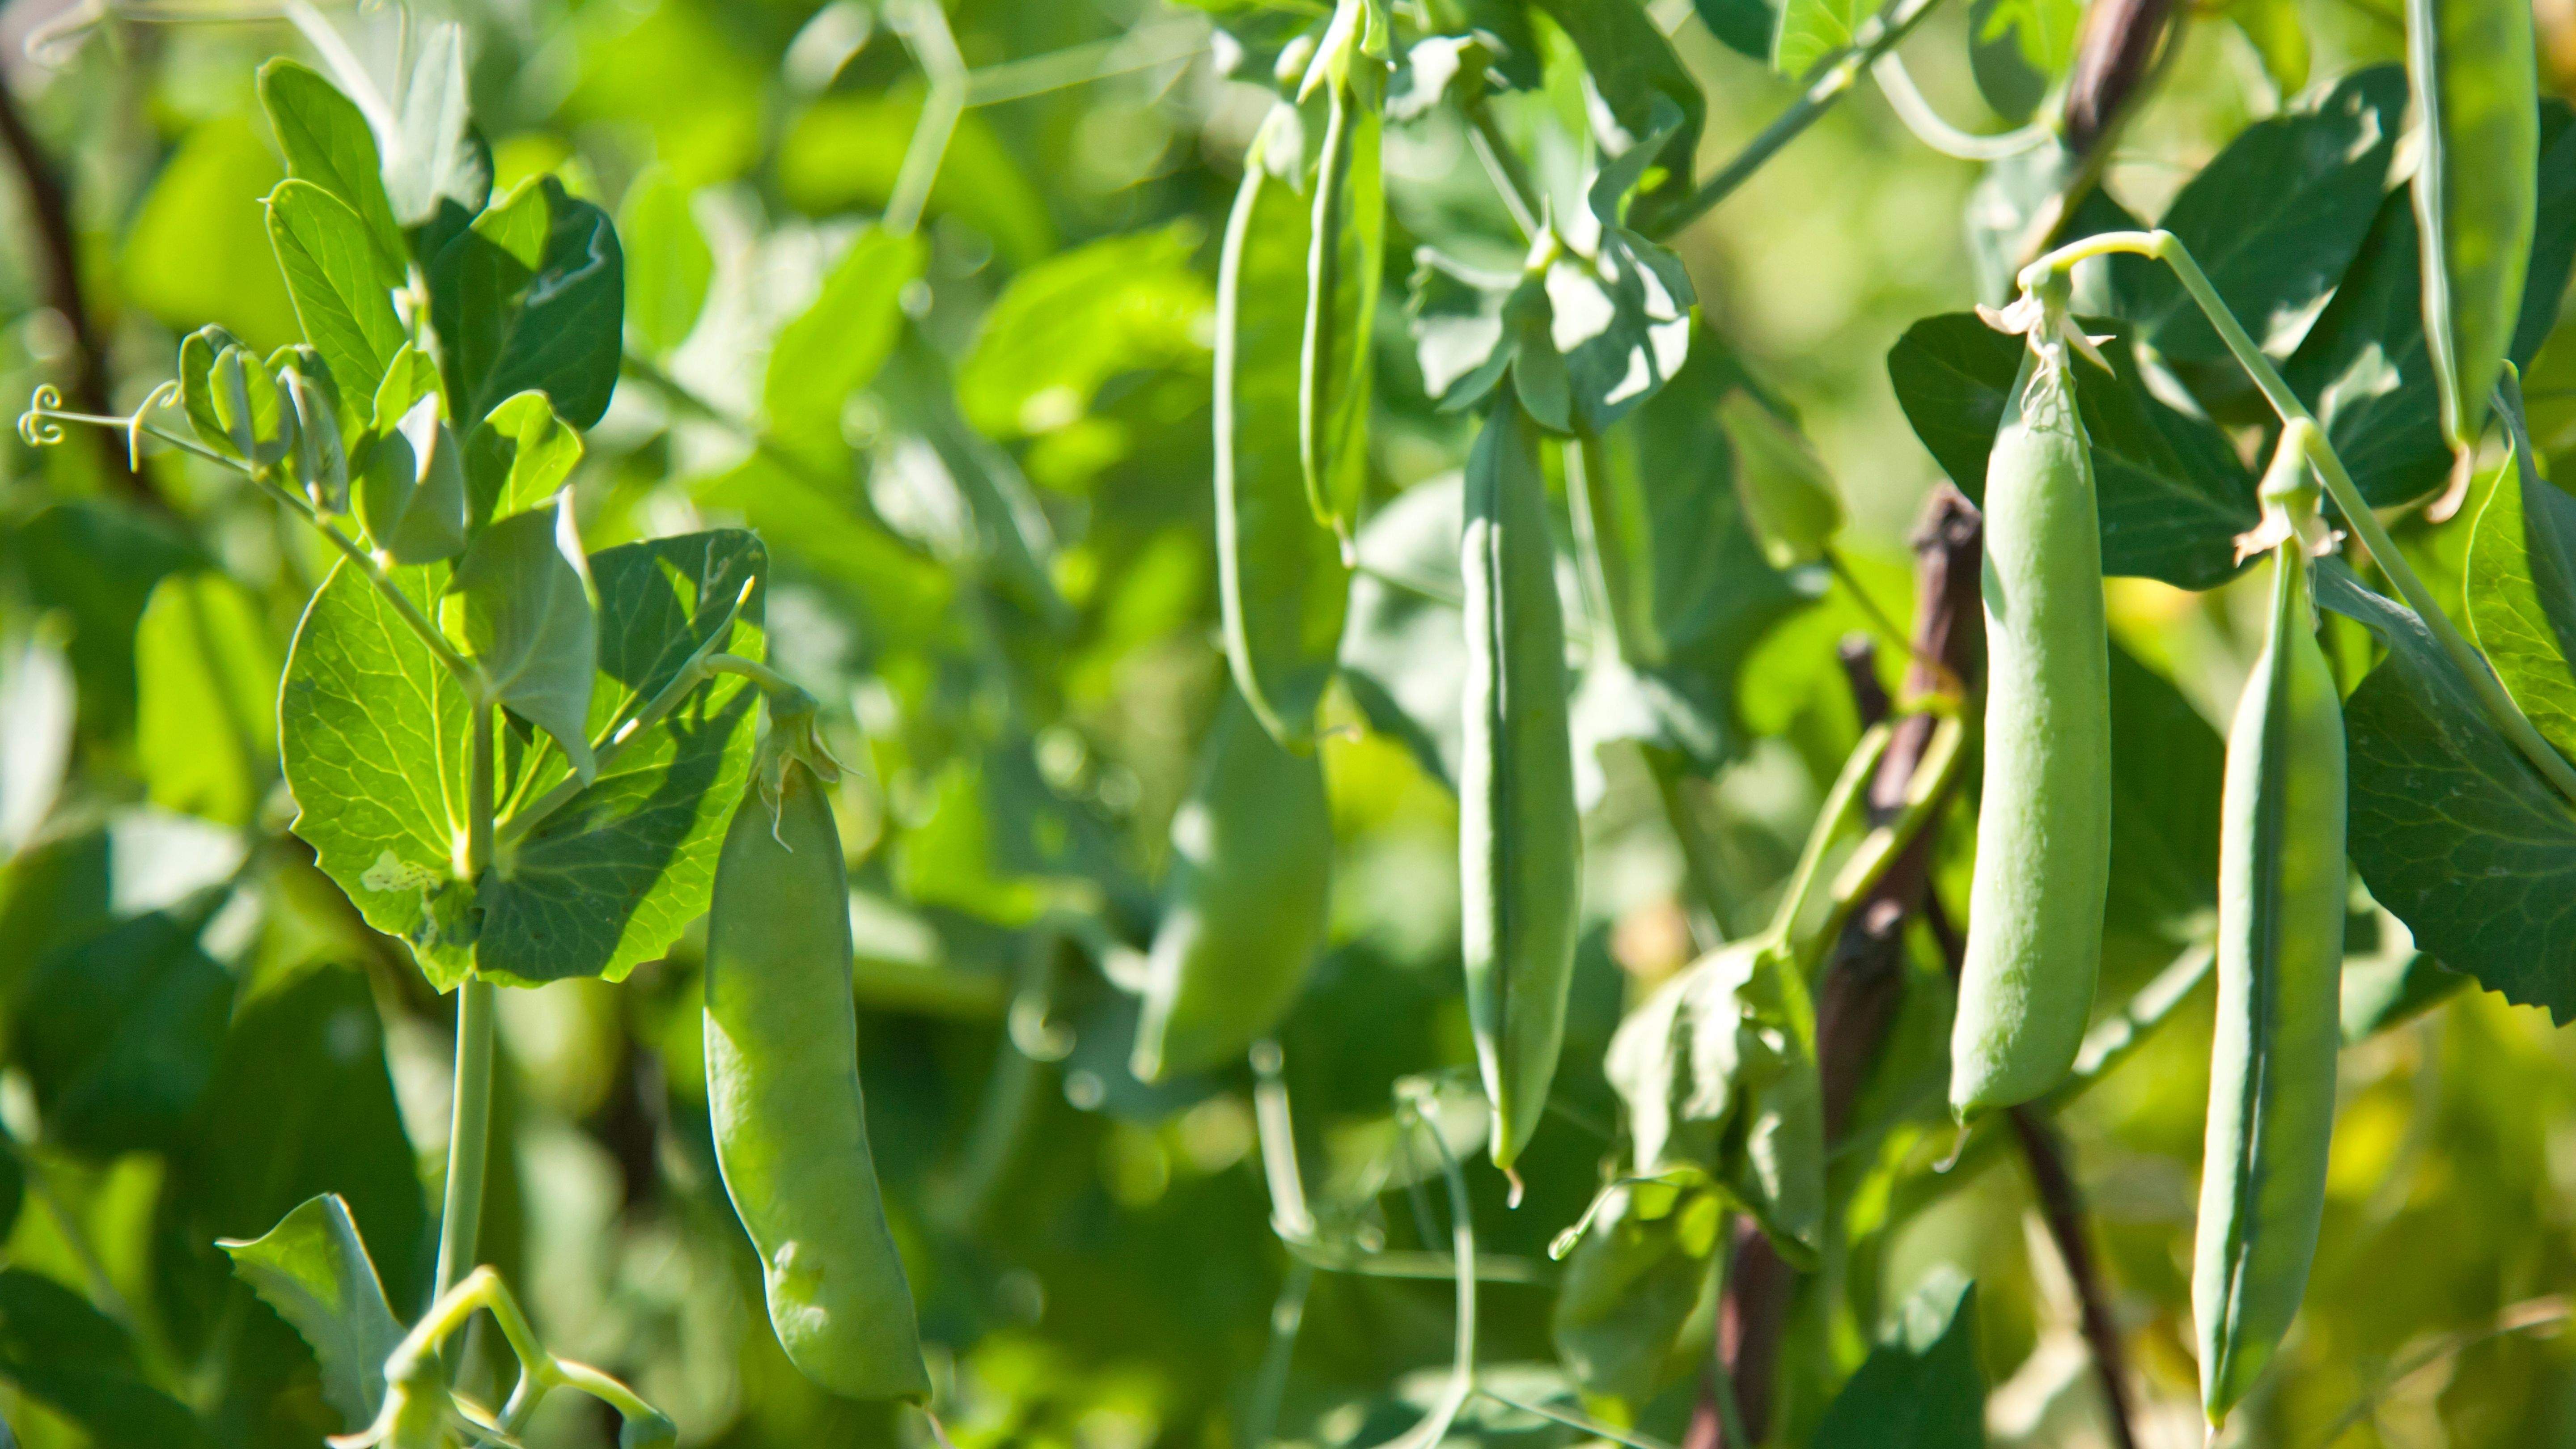 Overview of Pea Pests